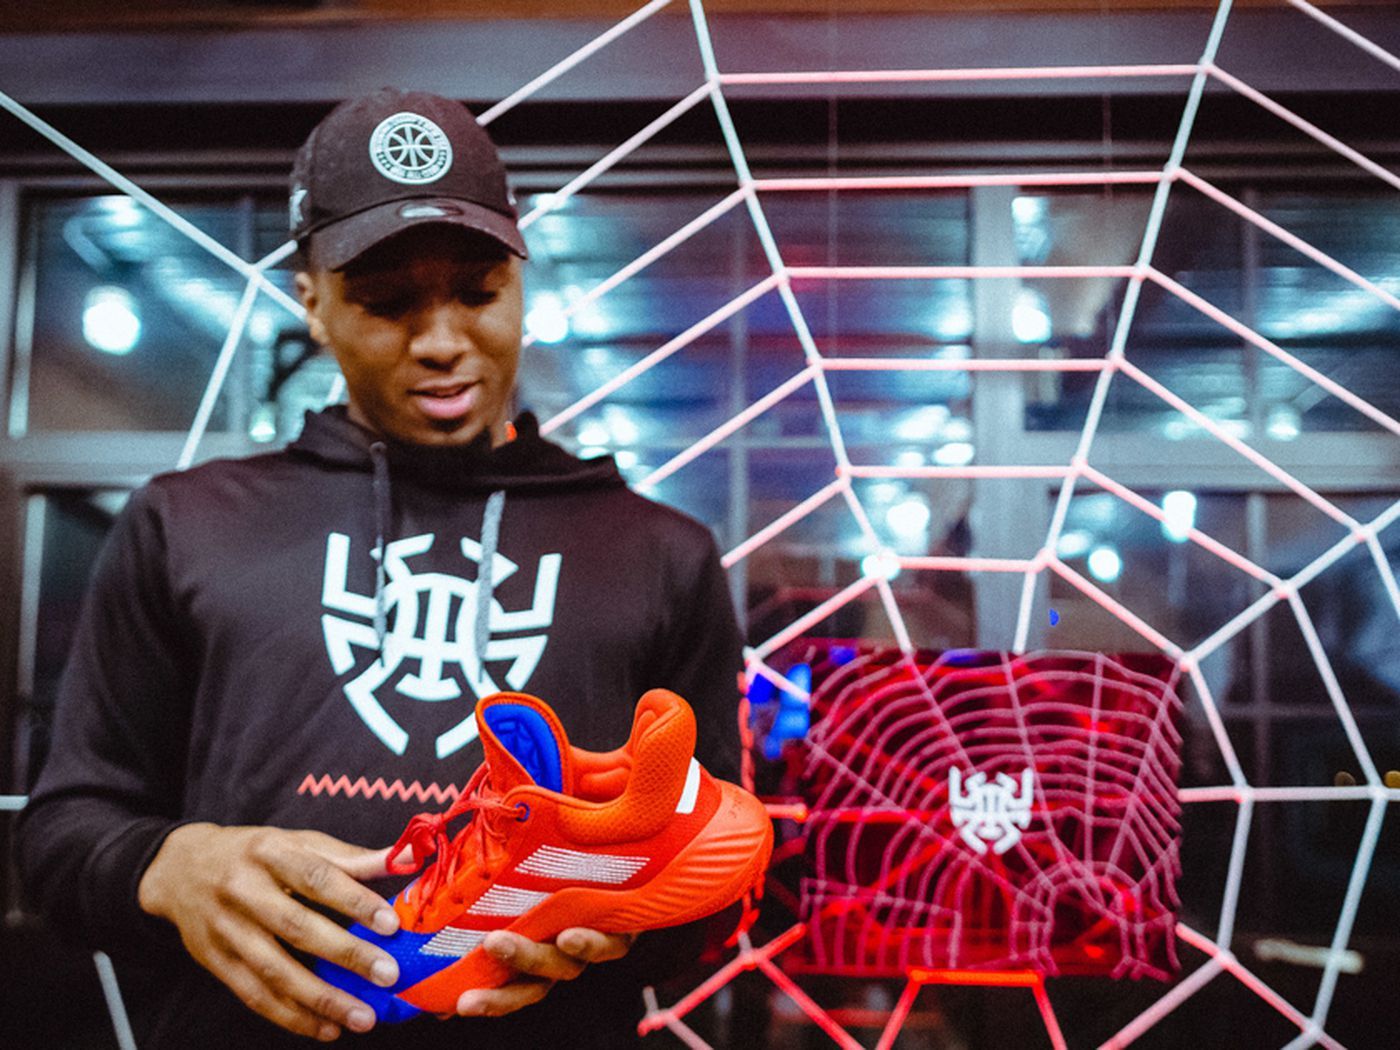 Here's a first look at Donovan Mitchell's Adidas signature shoe